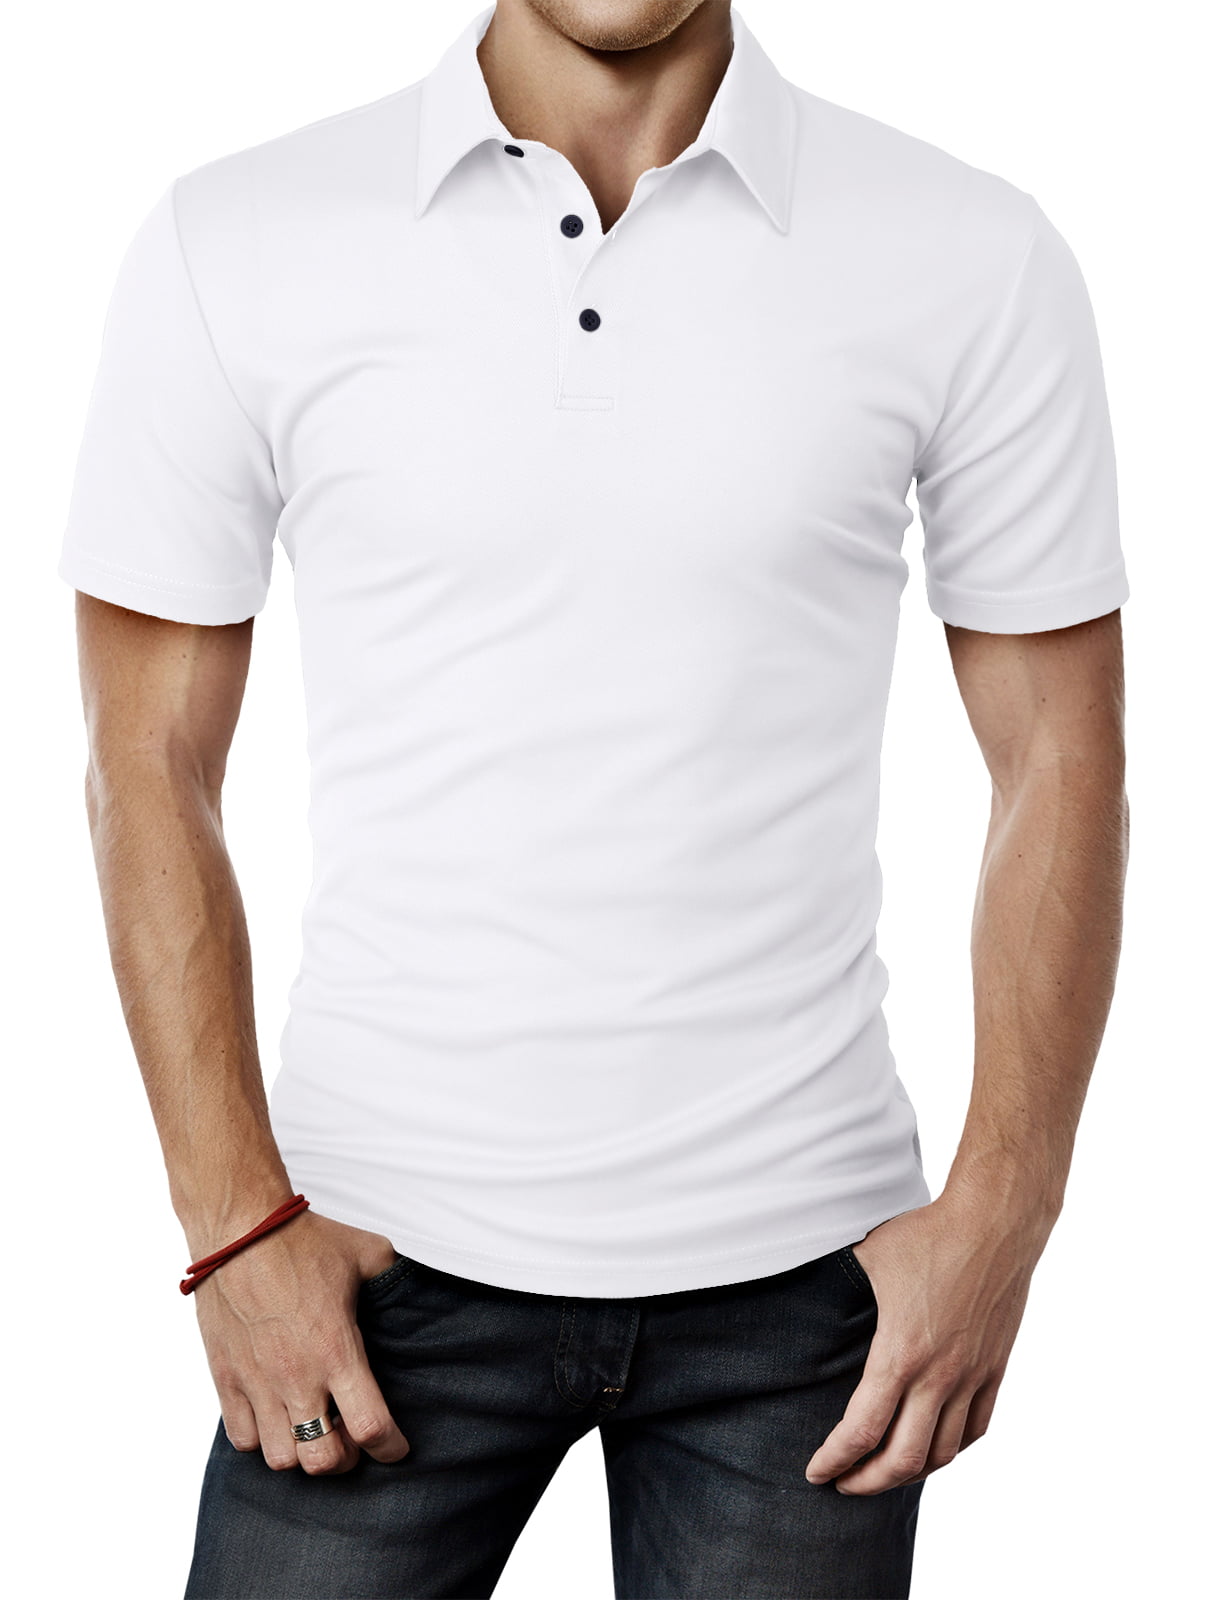 H2H Mens Cool Dry Compression Short Sleeve Polo T-Shirts WHITE US S ...